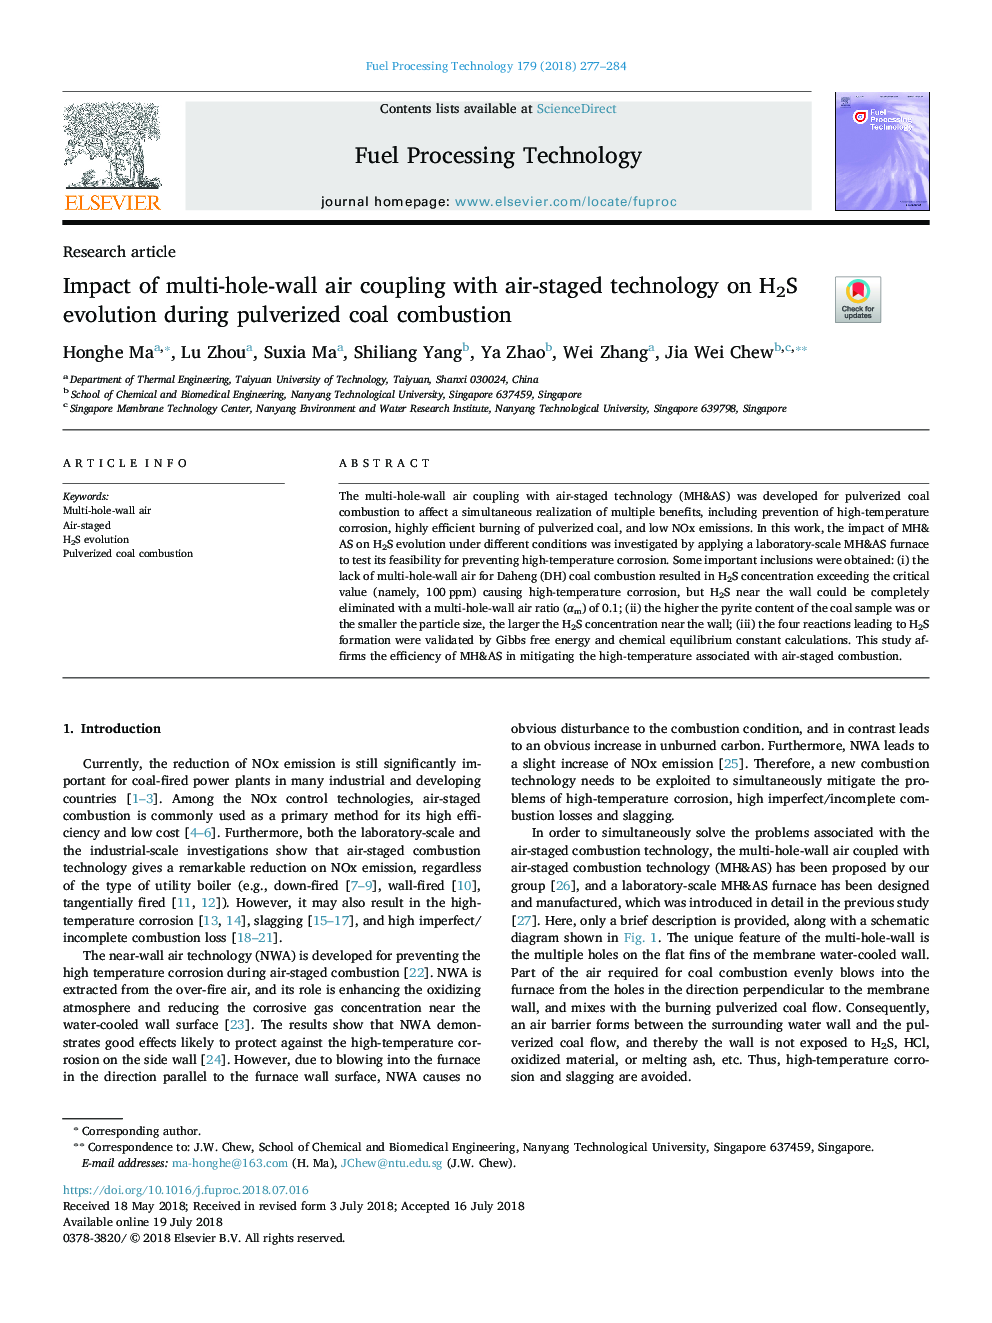 Impact of multi-hole-wall air coupling with air-staged technology on H2S evolution during pulverized coal combustion